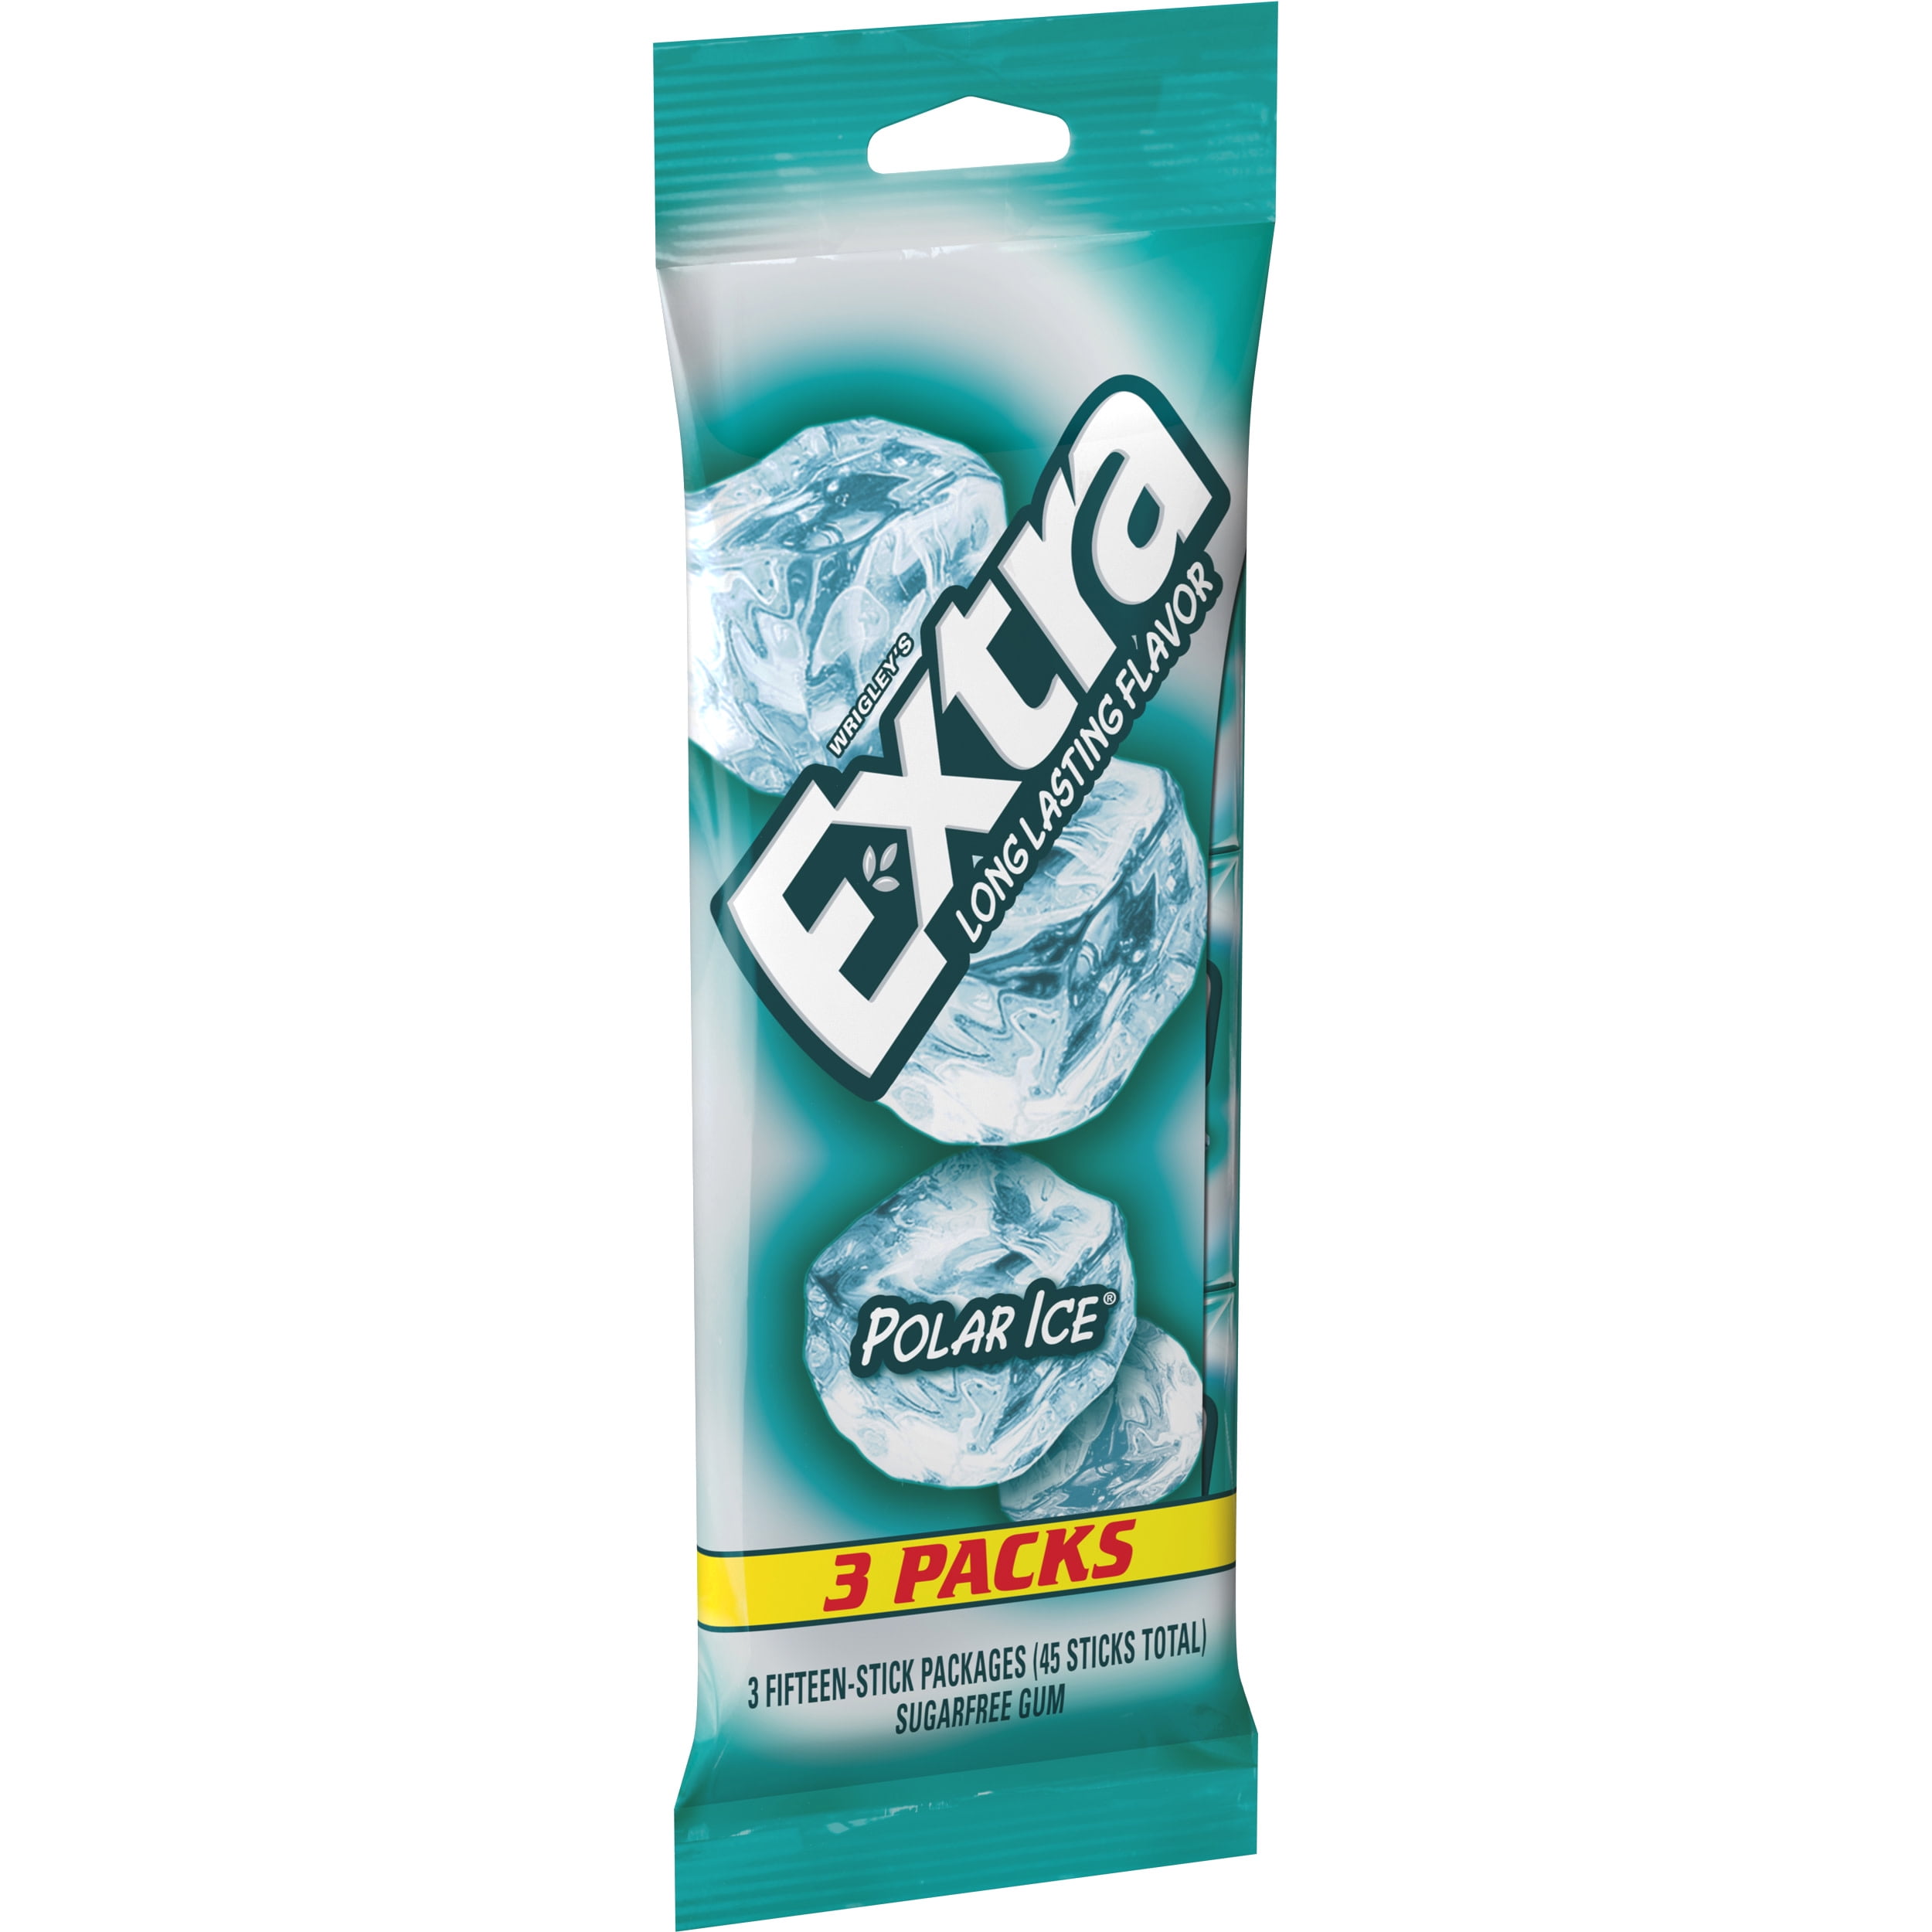 Buy Extra Polar Ice Sugar Free Chew hq nude picture